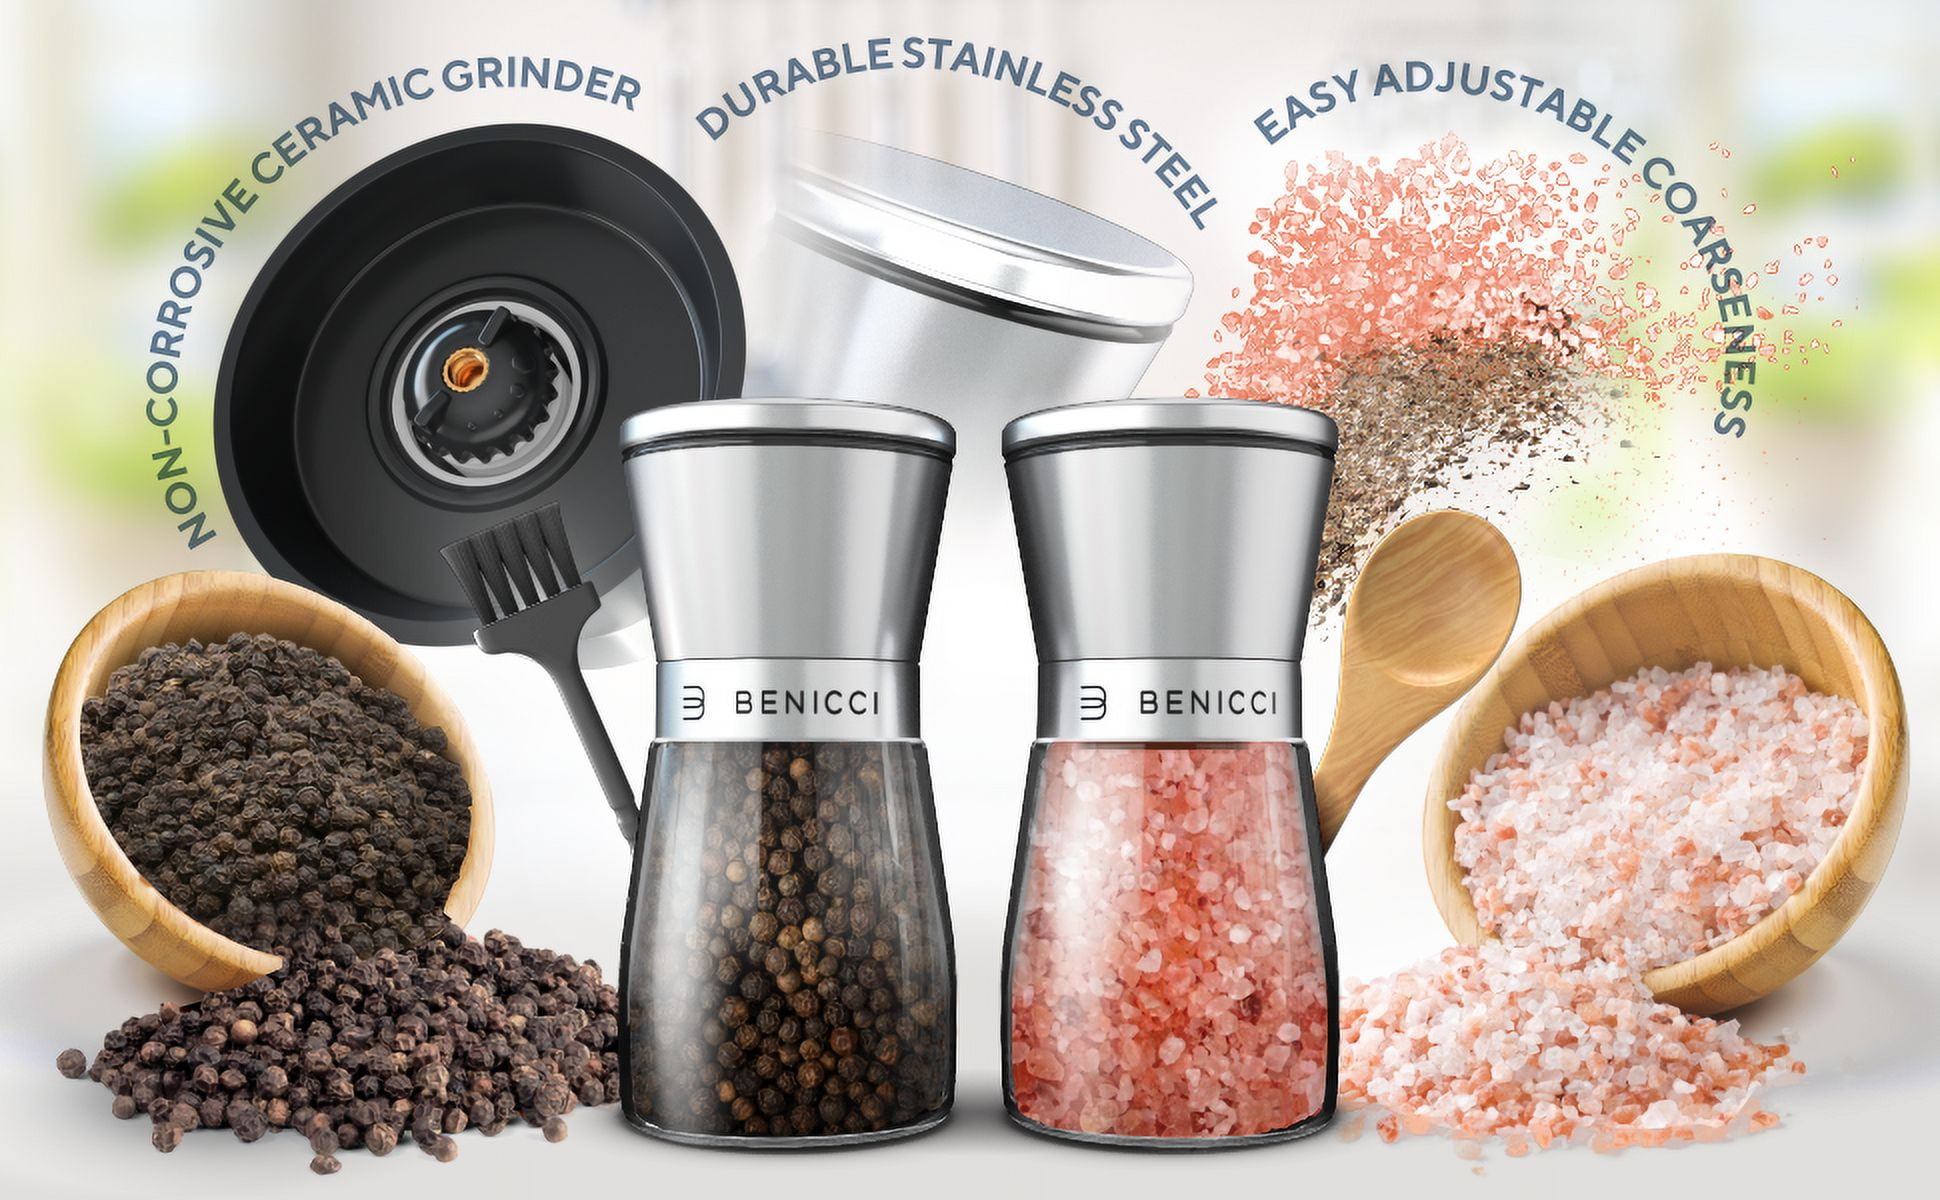 Beautiful Stainless Steel Salt & Pepper Grinders Refillable Set - Two 7 oz  Salt / Spice Shakers with Adjustable Coarse Mills - Easy Clean Ceramic  Grinders with BONUS Silicone Funnel and Cleaning Brush 